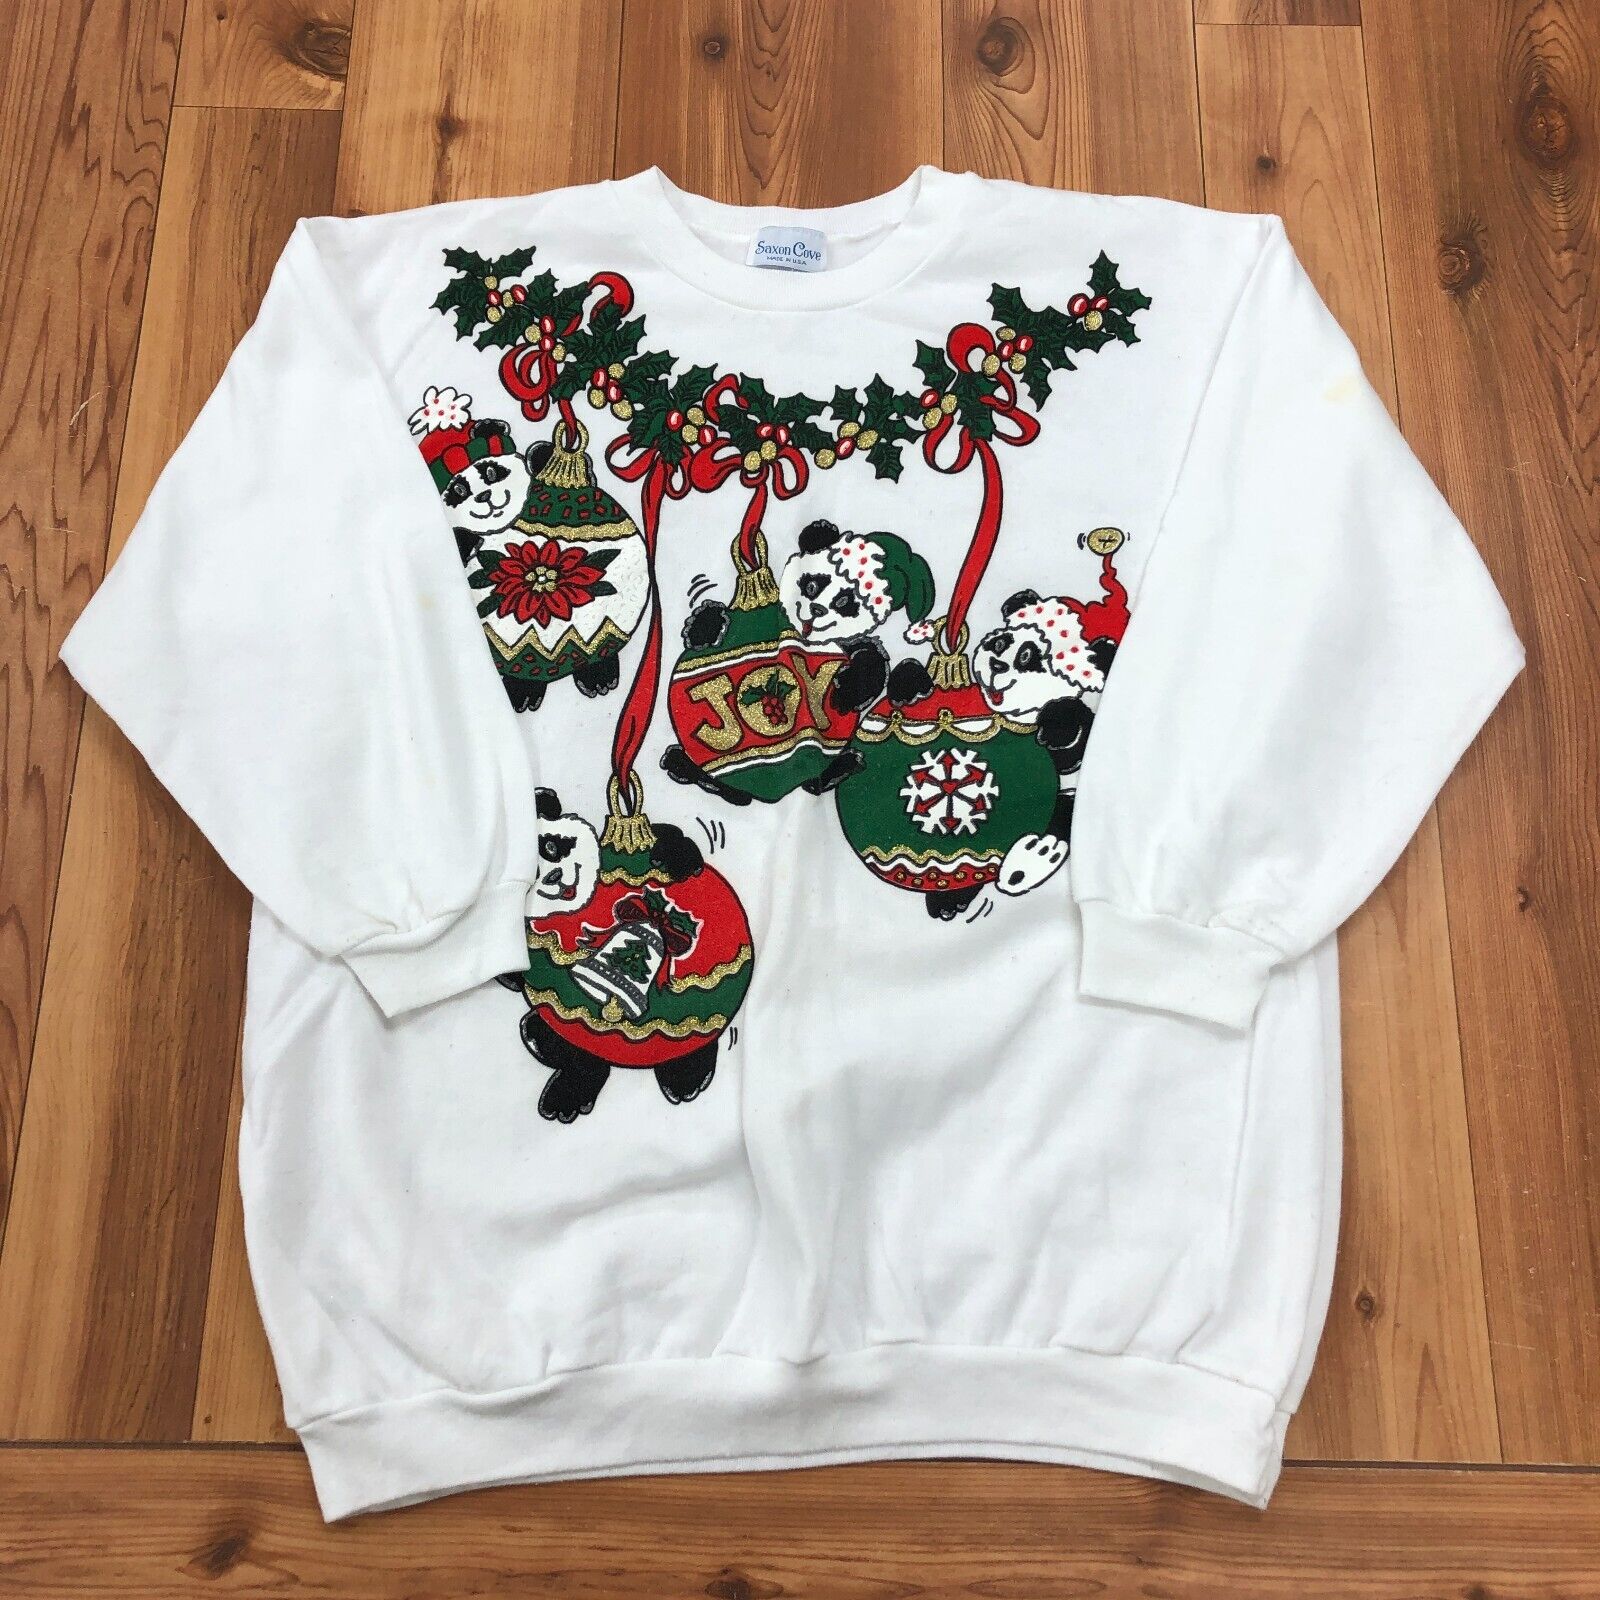 Vintage Saxon Cove White Christmas Panda Graphic Pullover Sweater Adult Size M